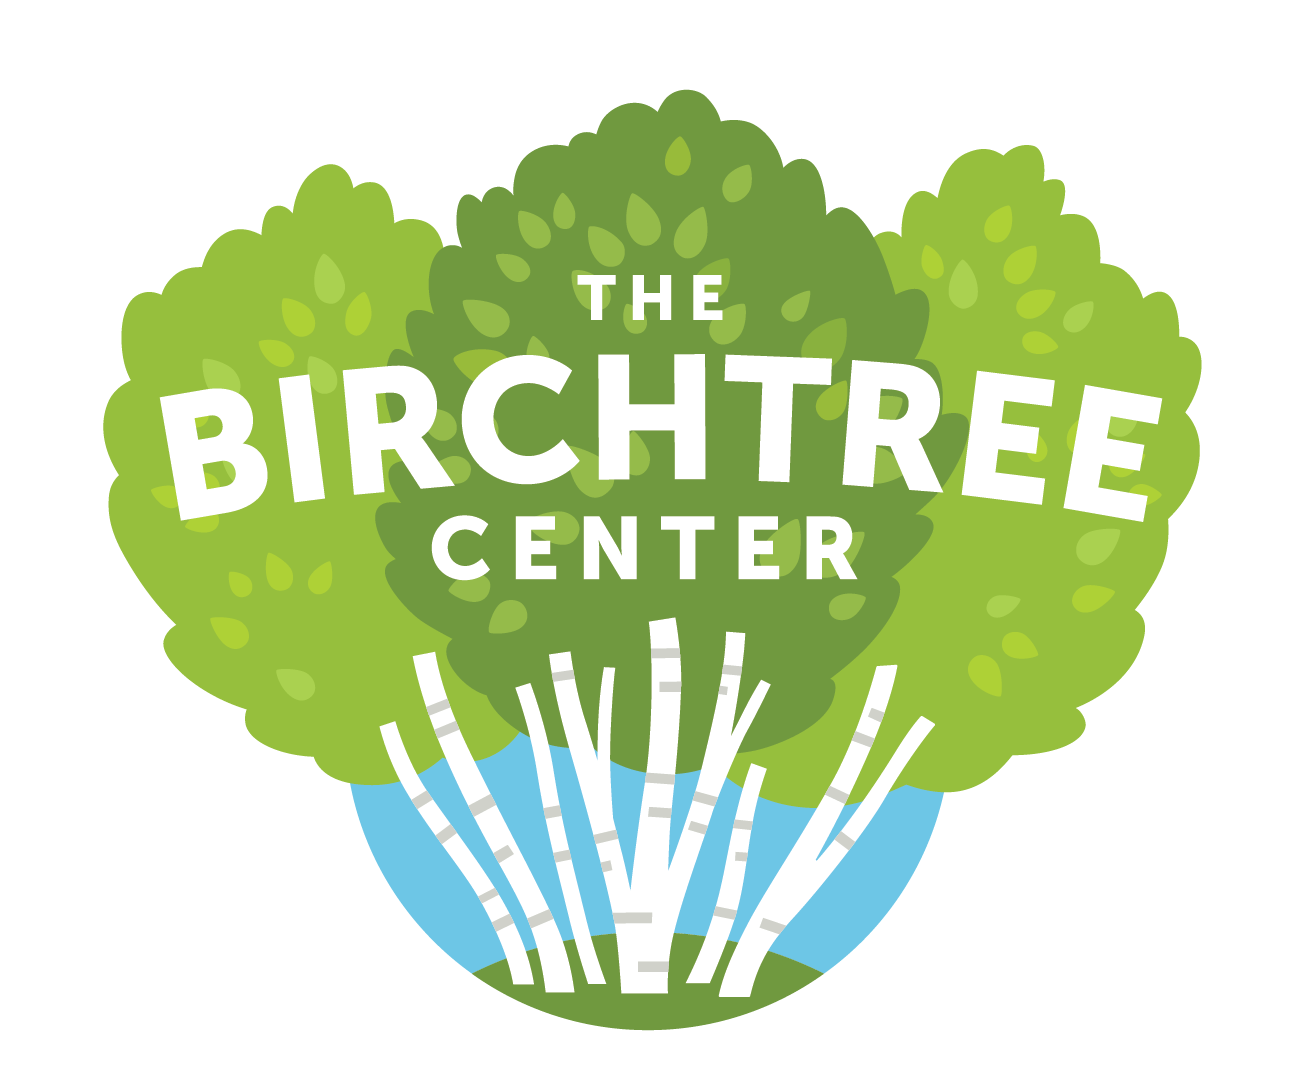 The Birchtree Center